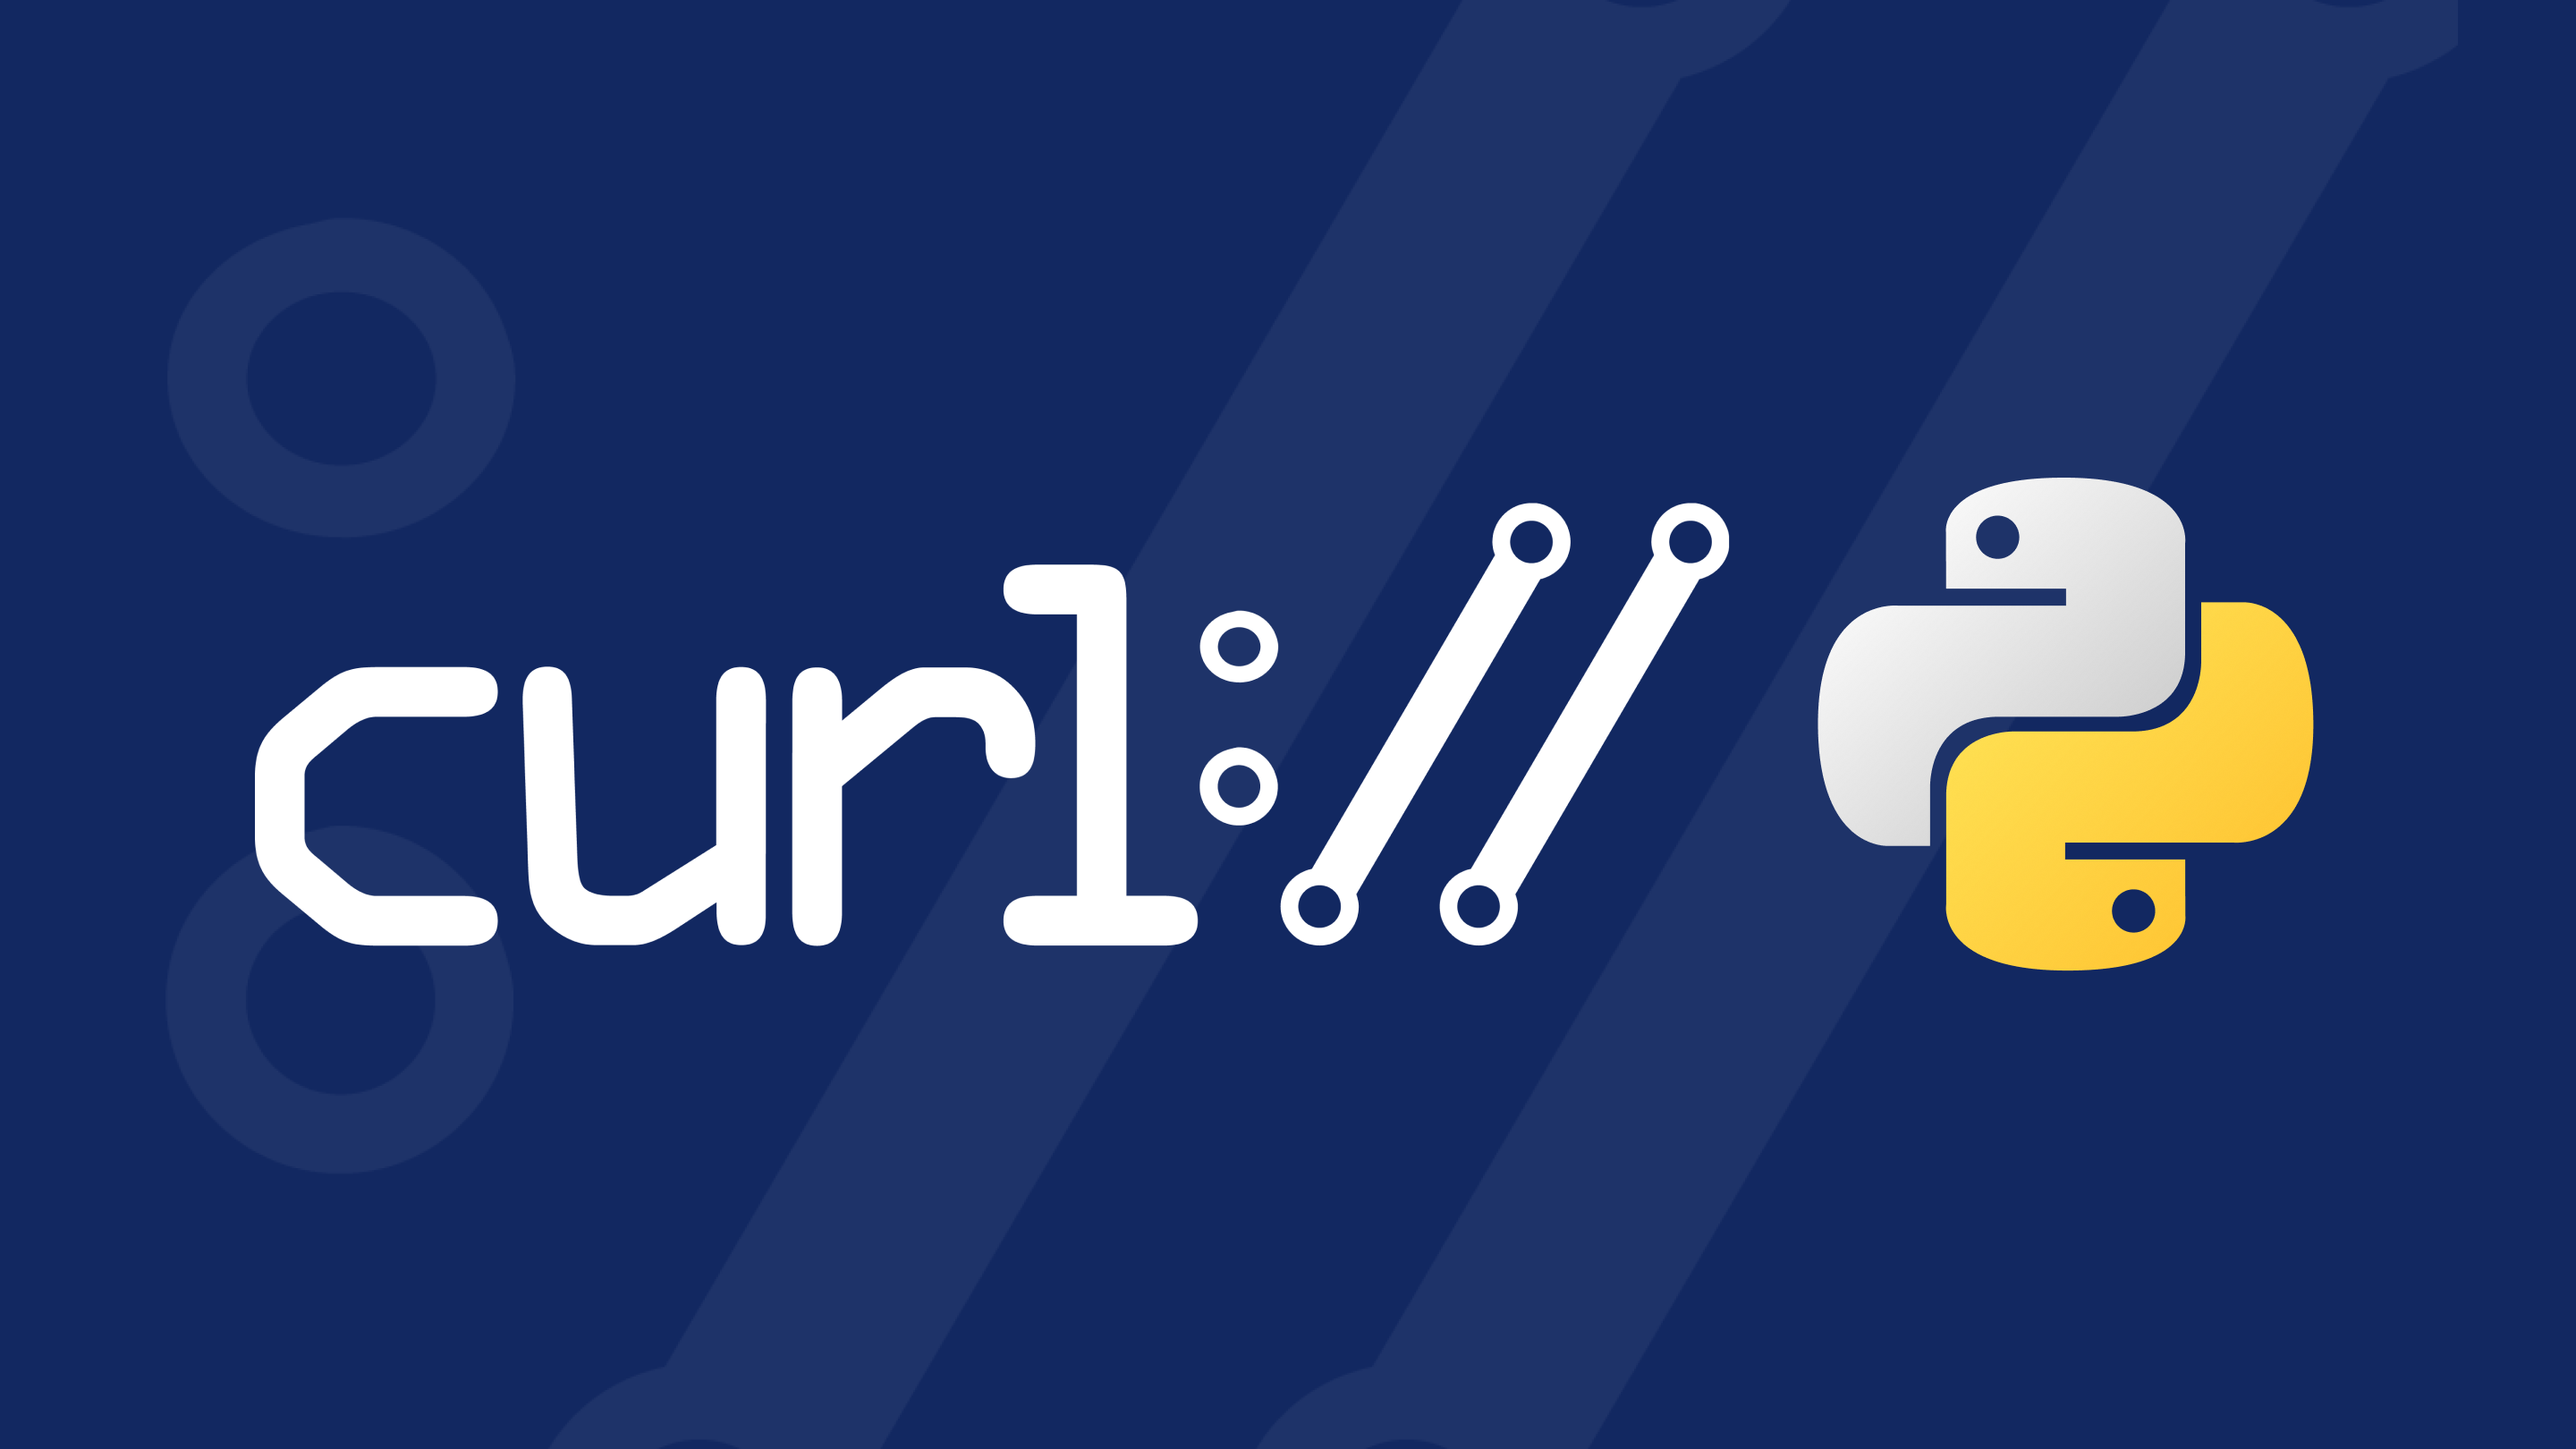 How to use curl in Python